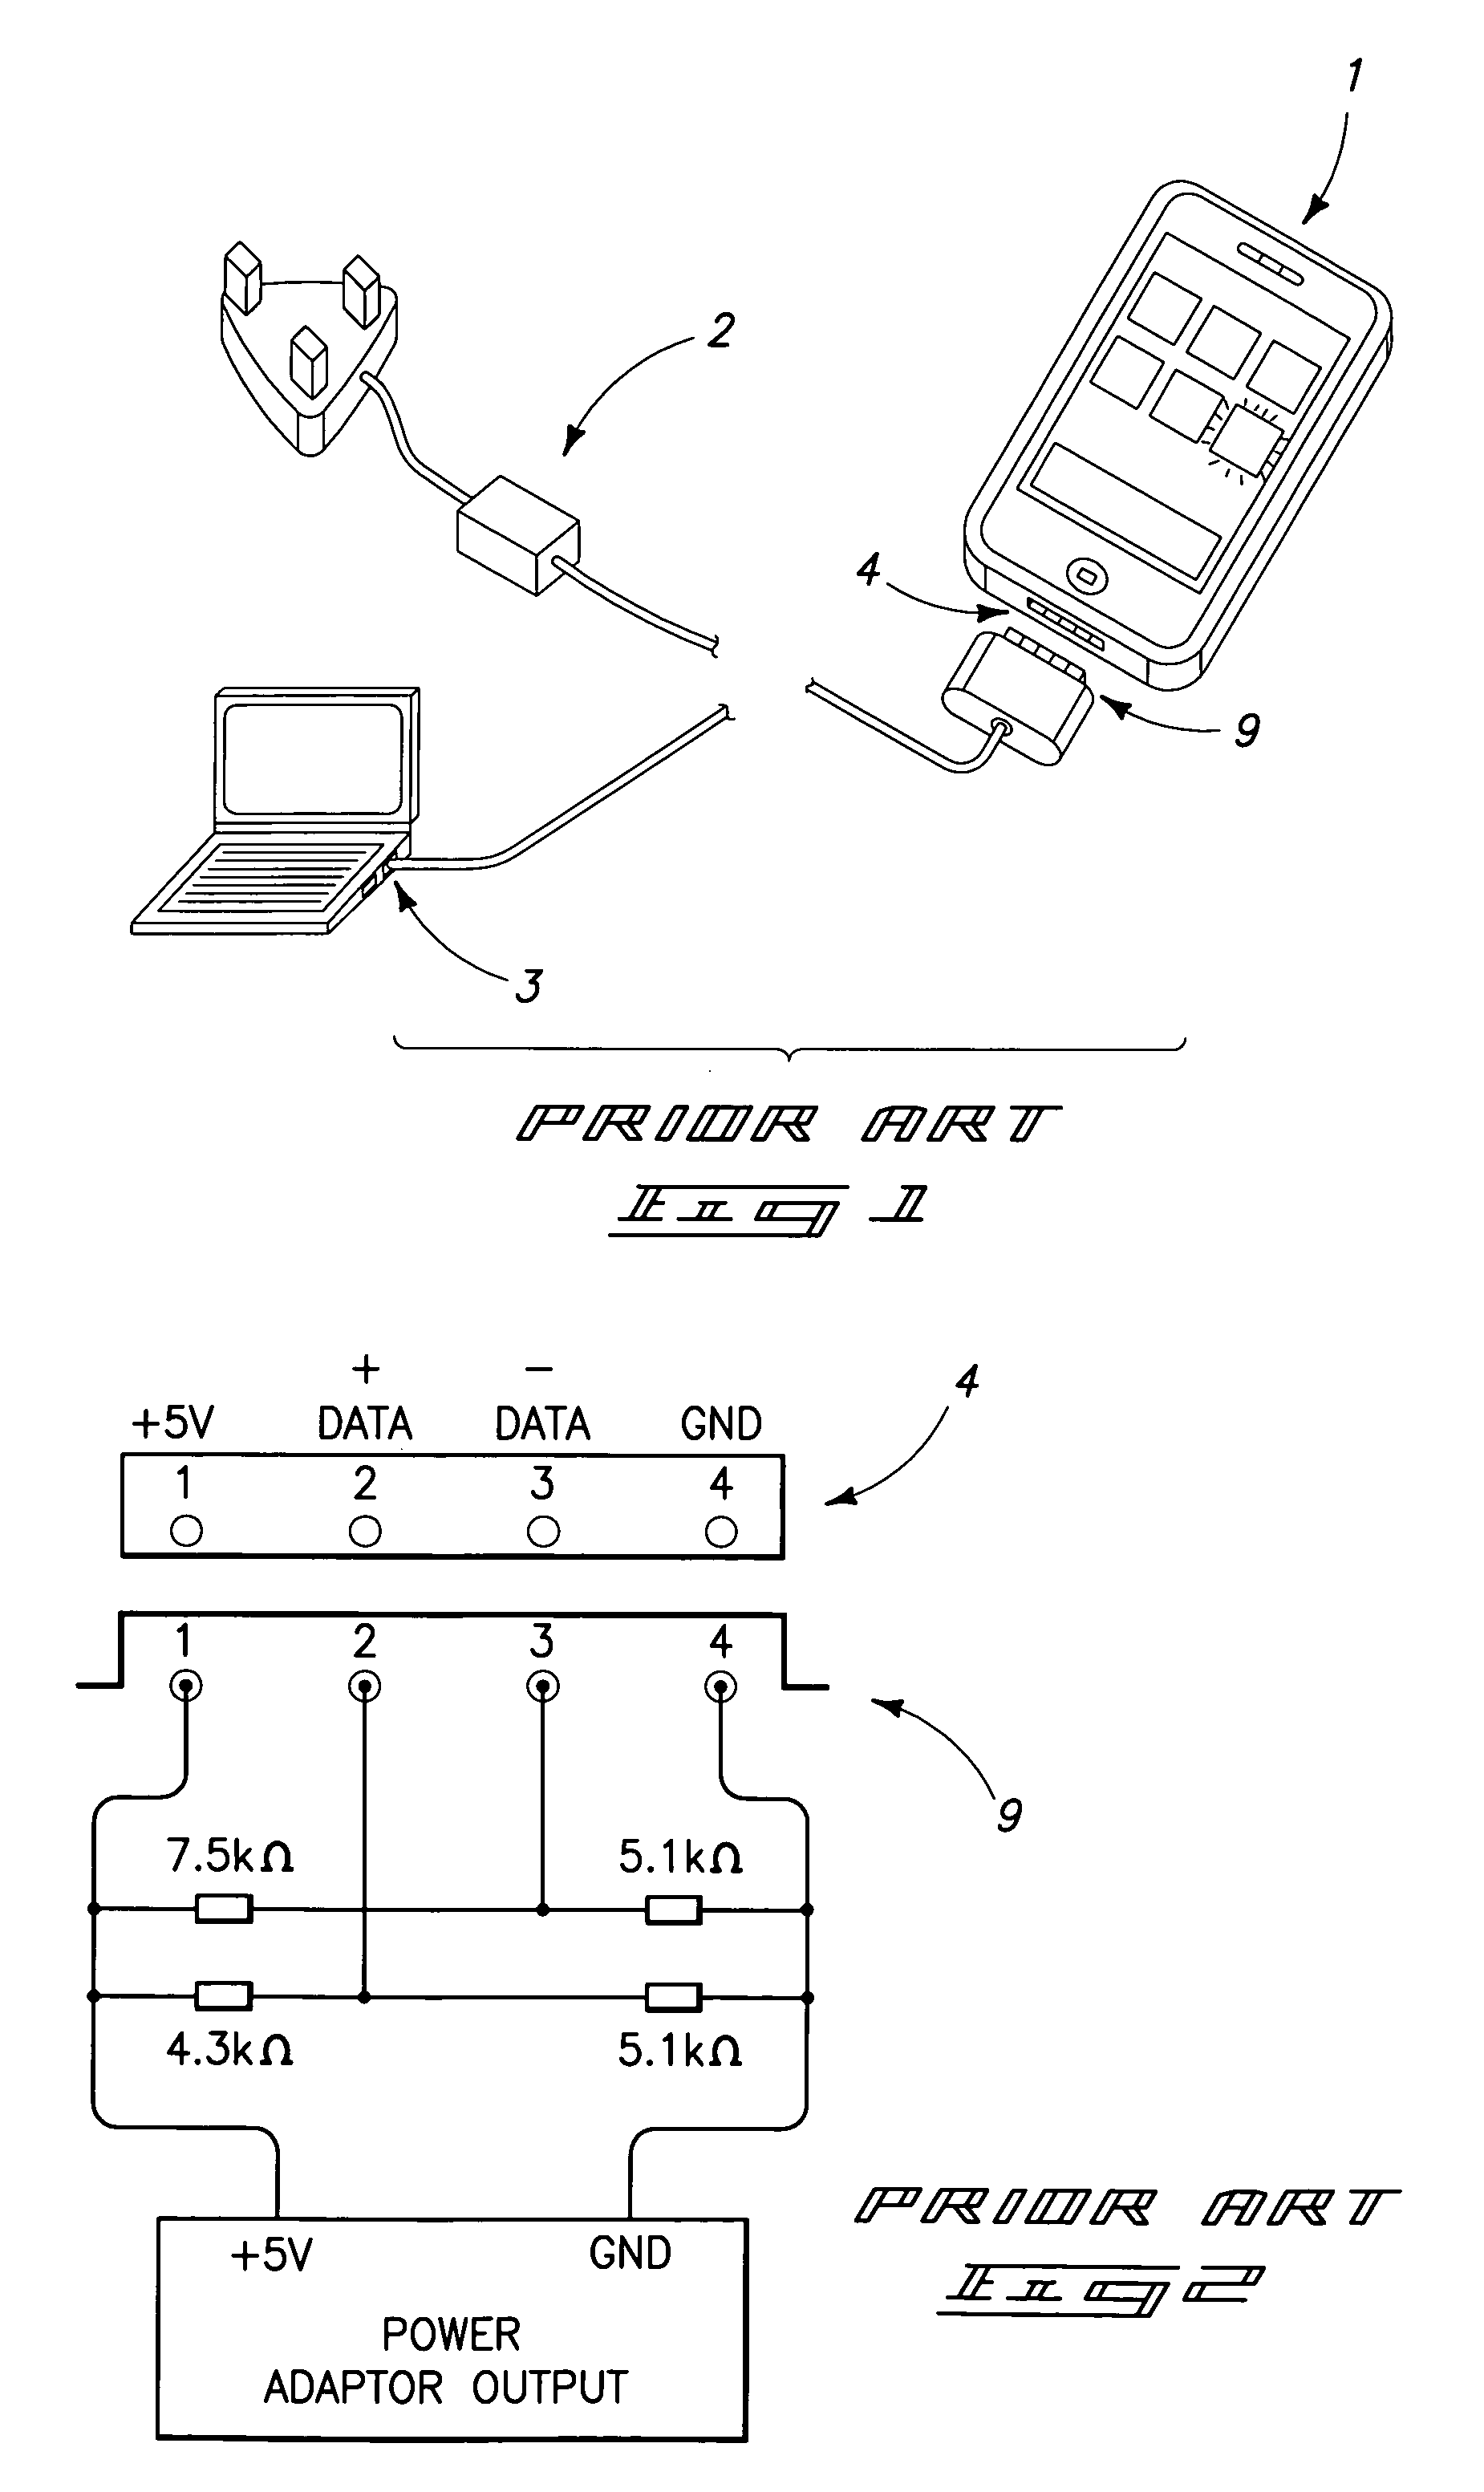 Inductively powered sleeve for mobile electronic device